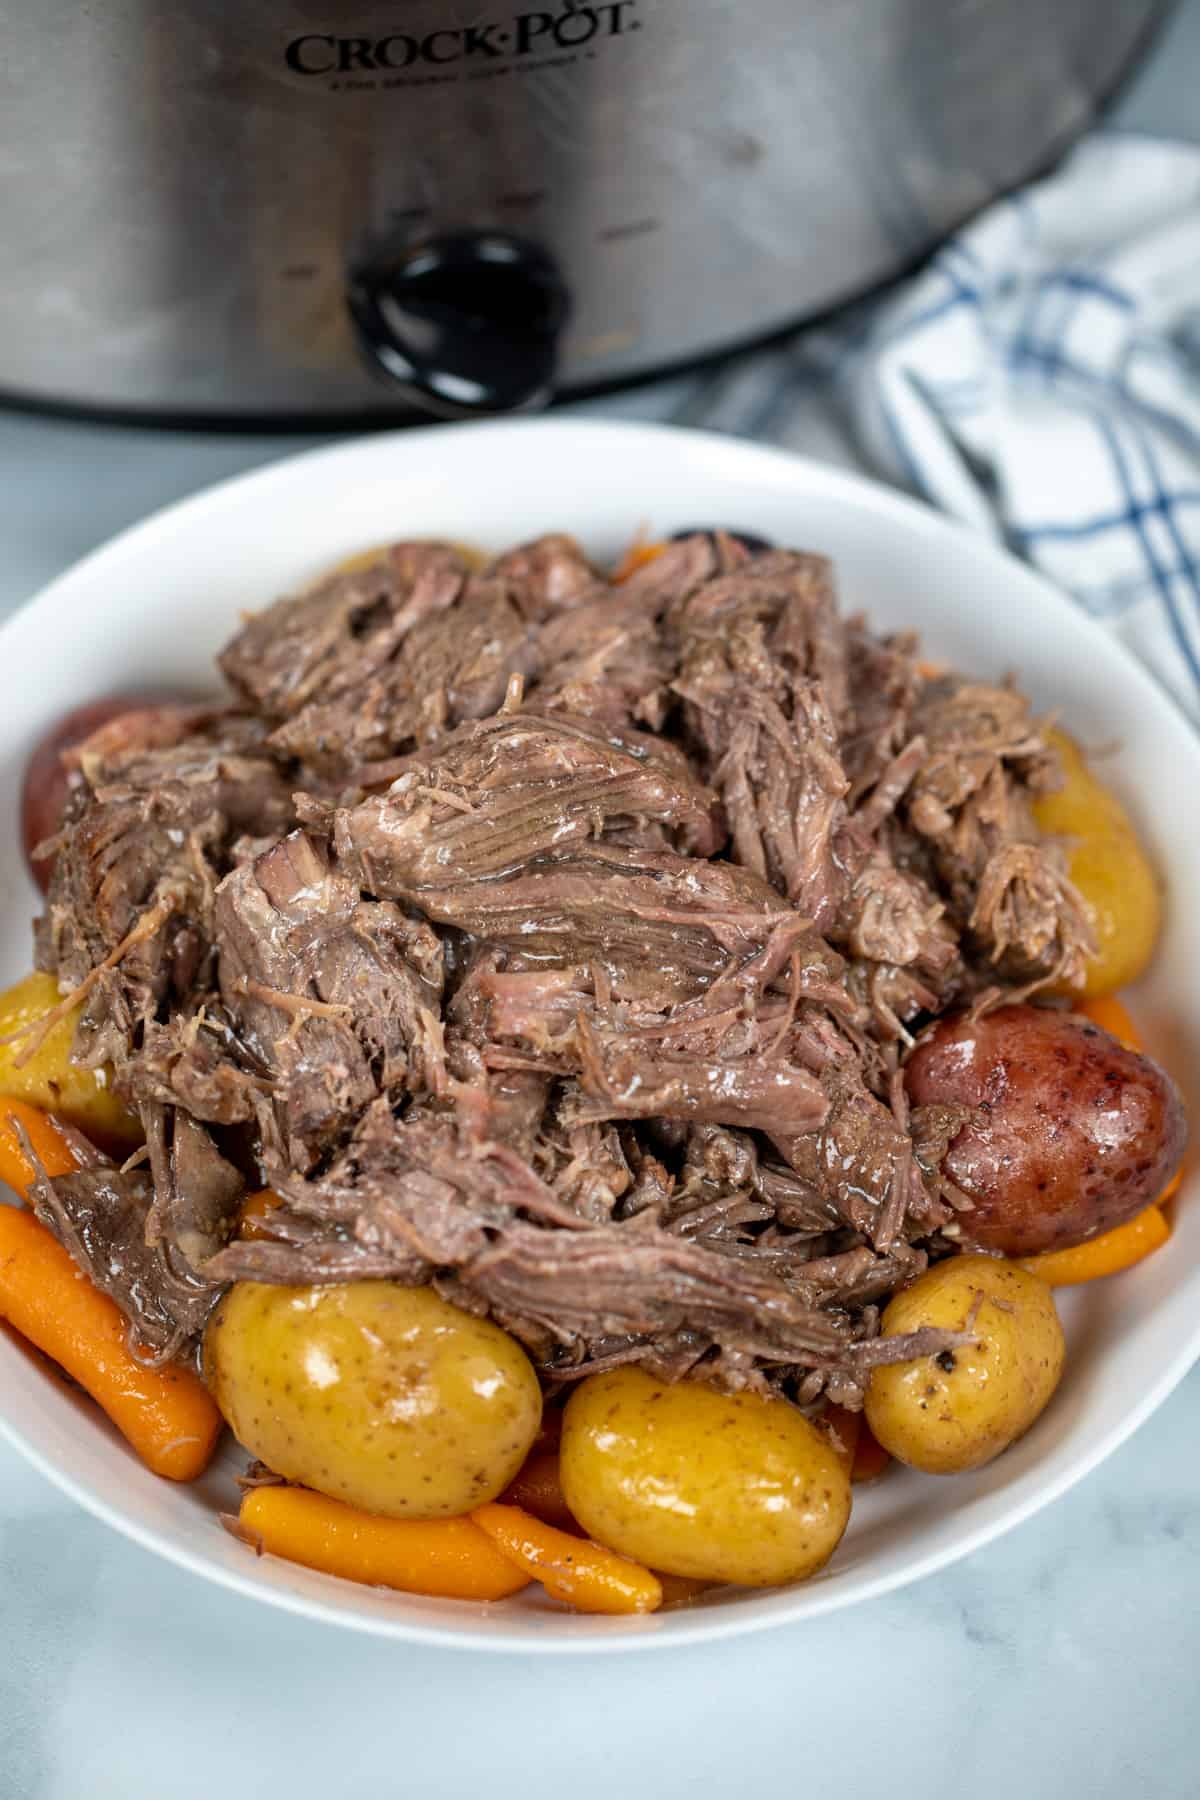 Shredded pot roast in white dish over potatoes and carrots next to crock pot.